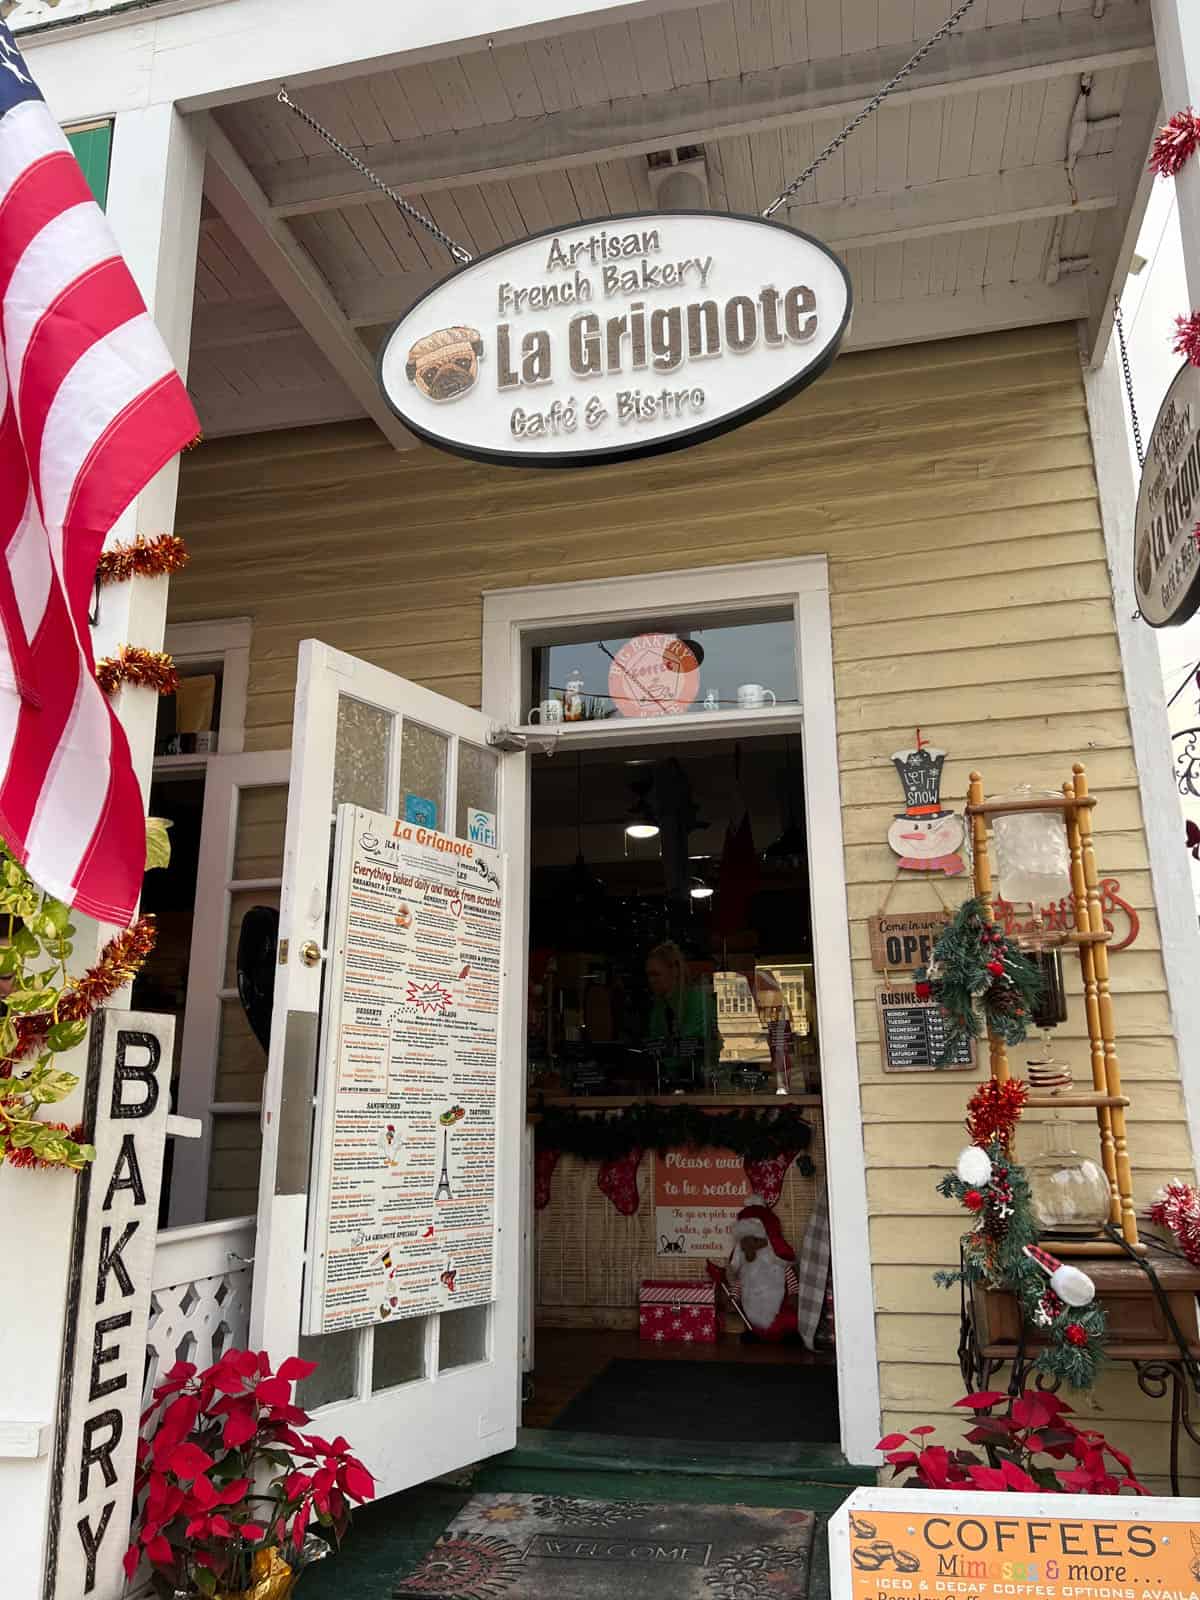 An image of the entrance of the La Grignote Bakery in Key West, Florida.